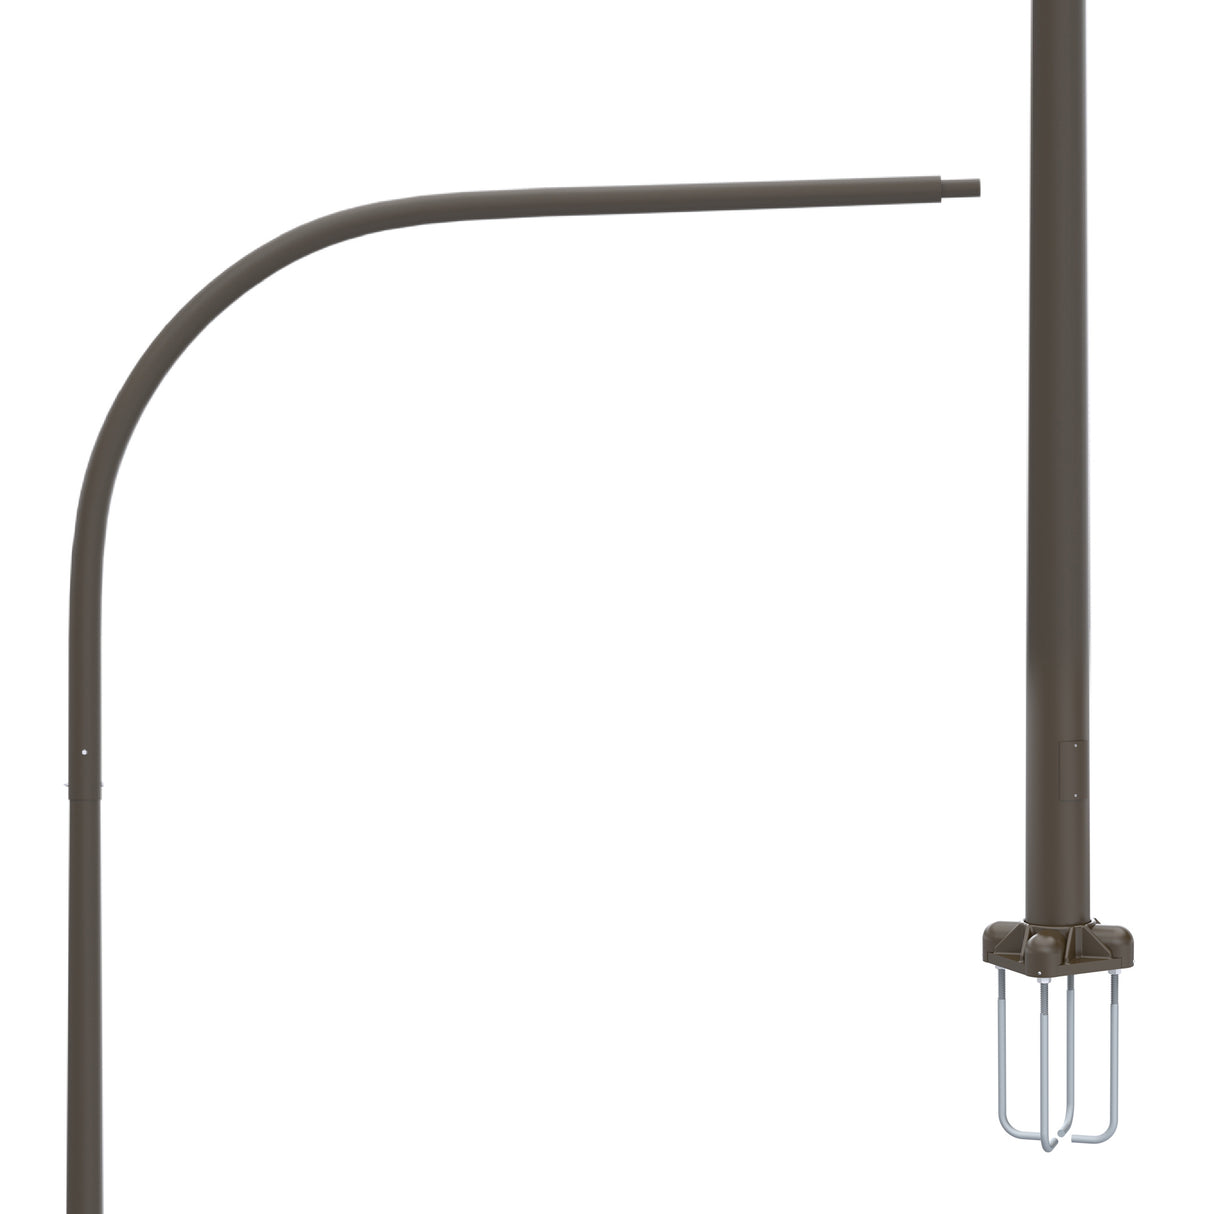 25' Tall x 8.0" Base OD x 4.5" Top OD x 0.156" Thick, Round Tapered Aluminum, Anchor Base Light Pole with 10' Davit Arm